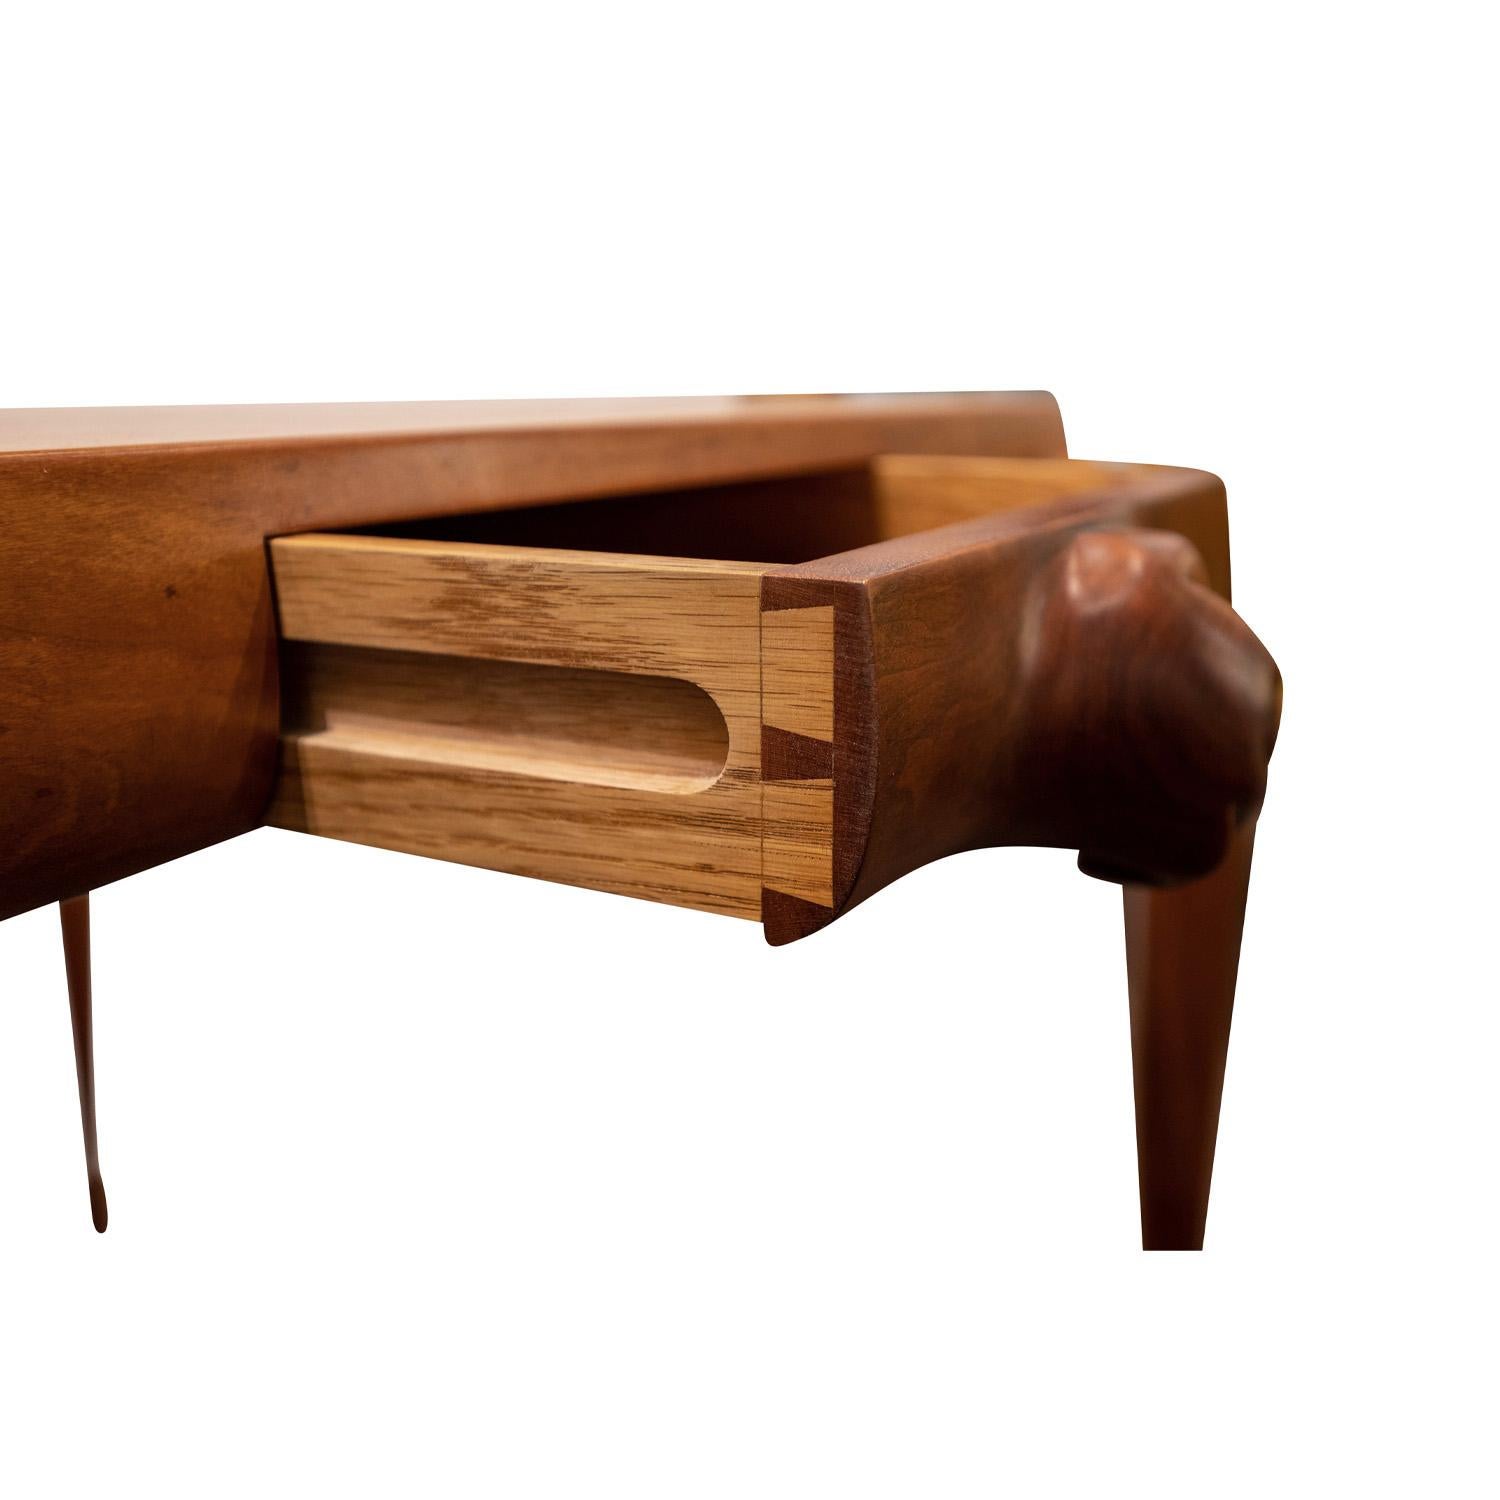 Hand-Crafted Philip LaVerne Important Sculpture Game Table with Carved Hands 1966, 'Signed'